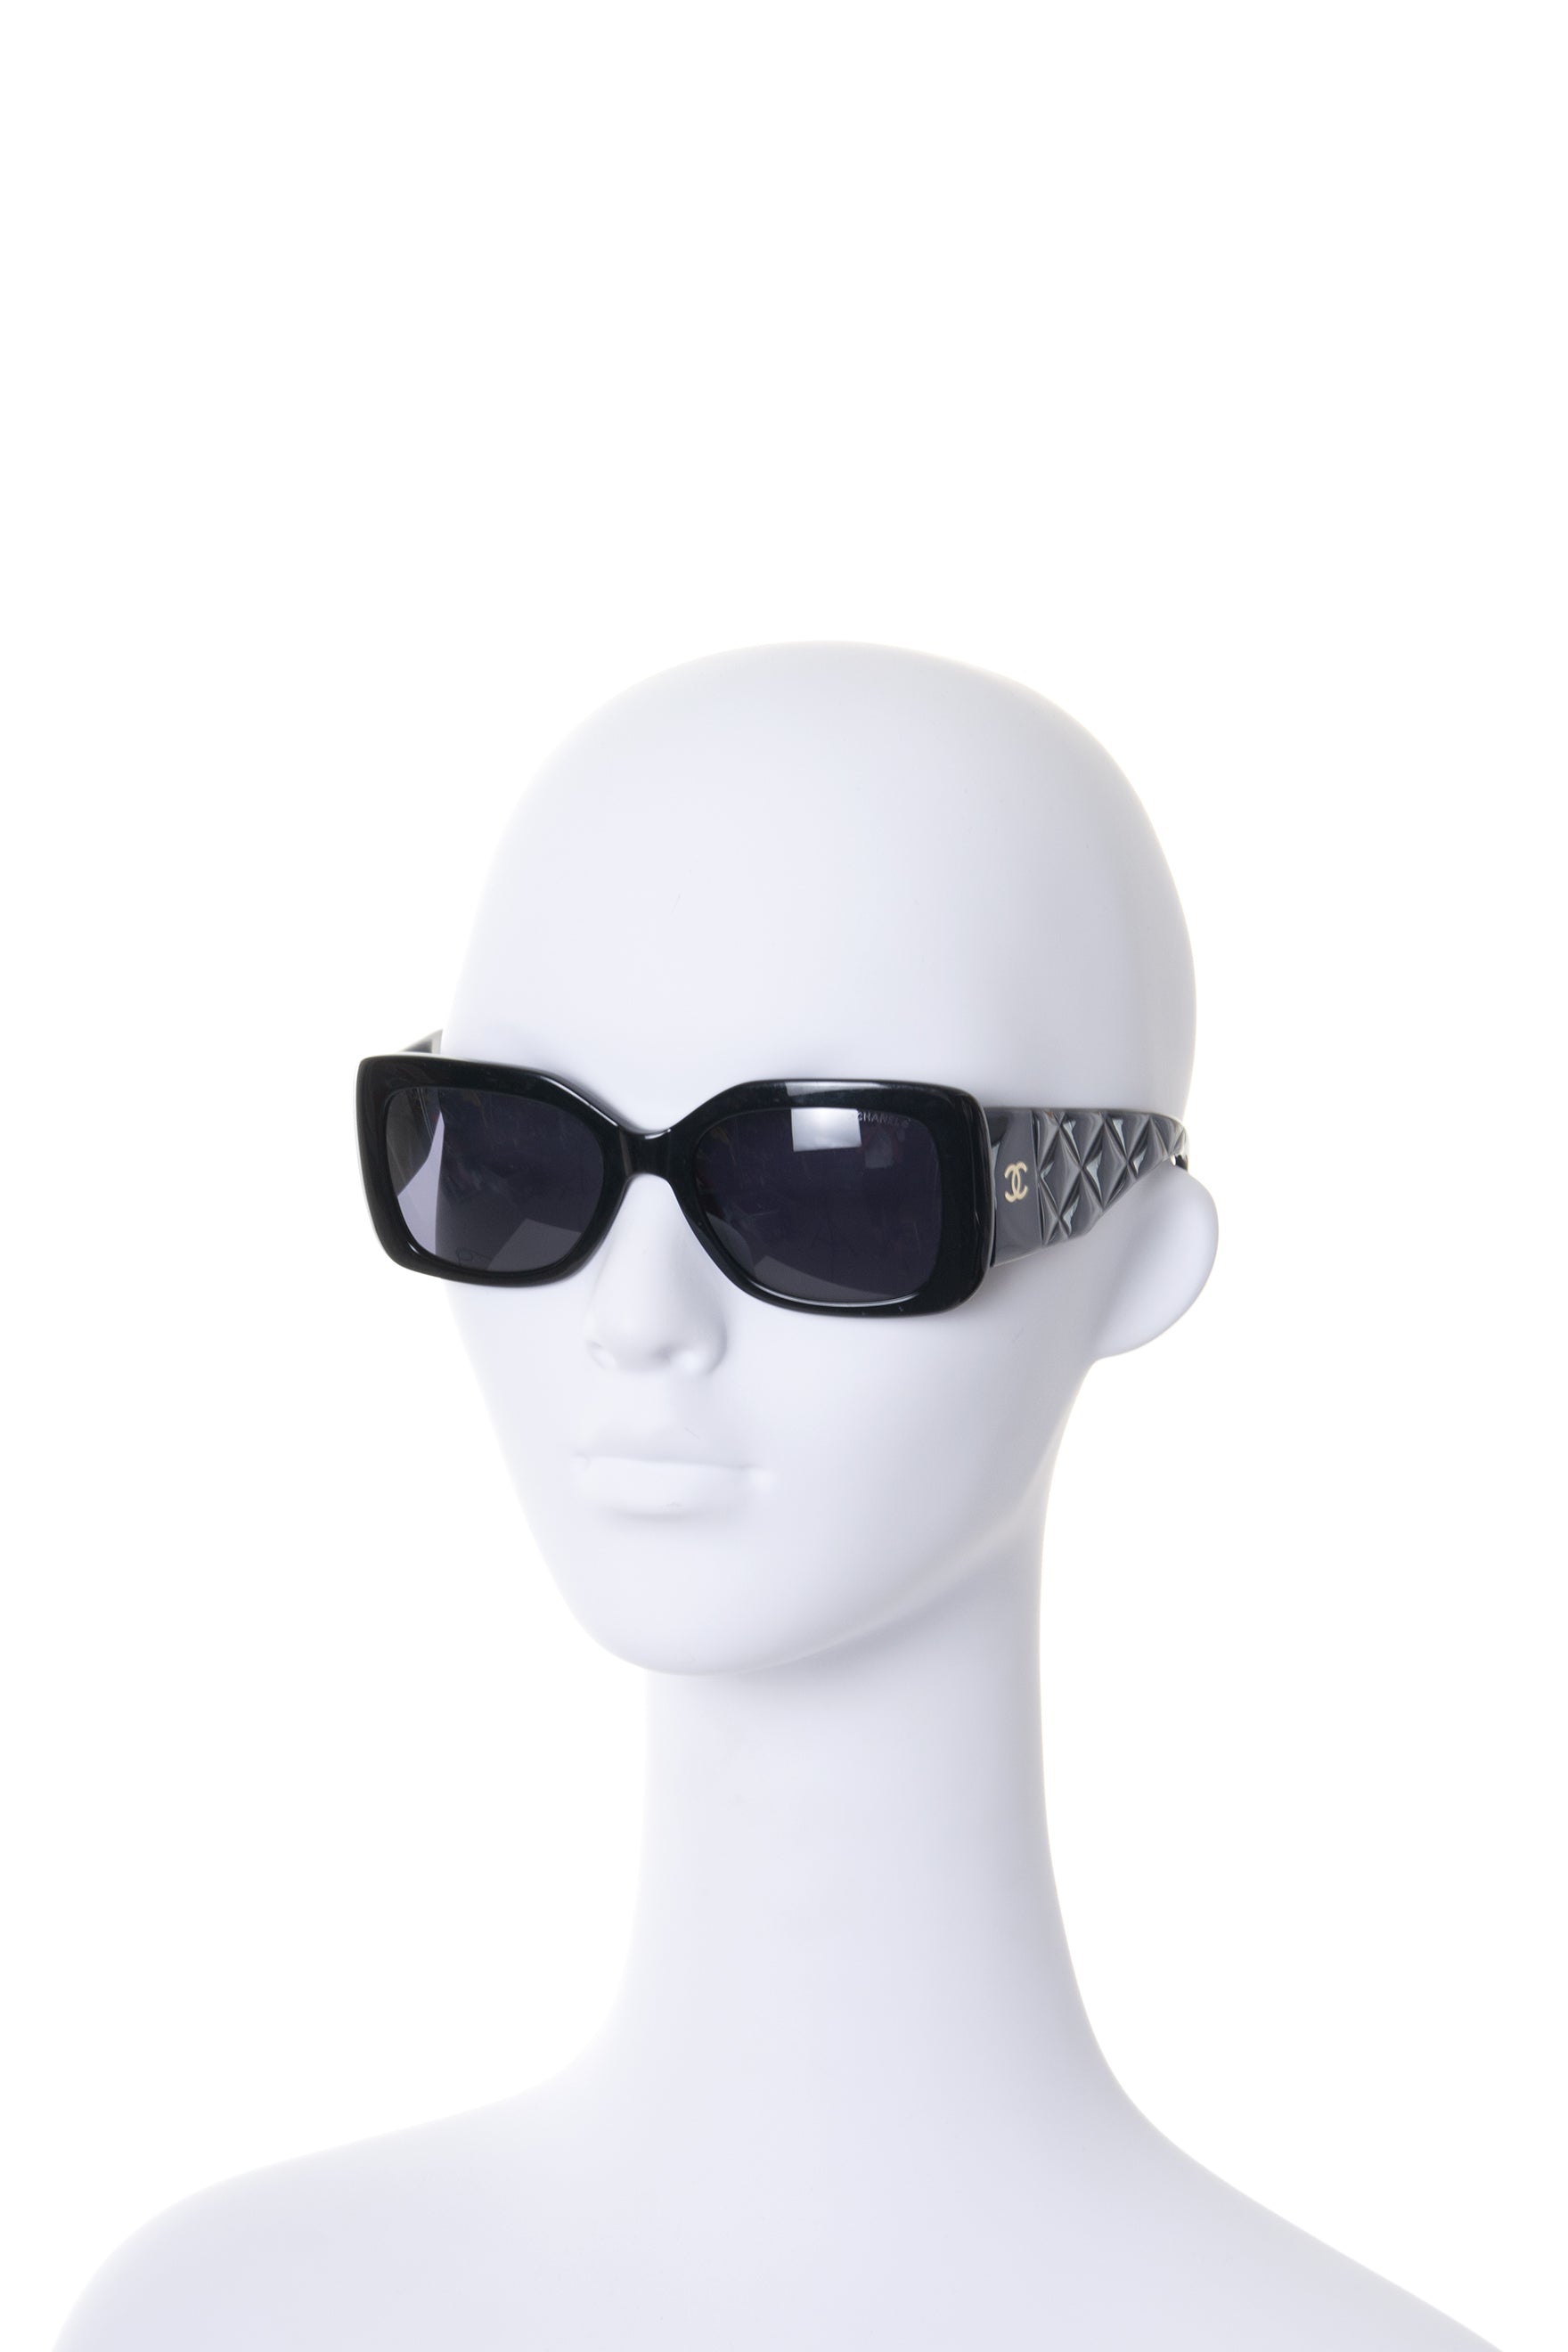 Chanel 5009 c.501/91 Sunglasses Frame Only